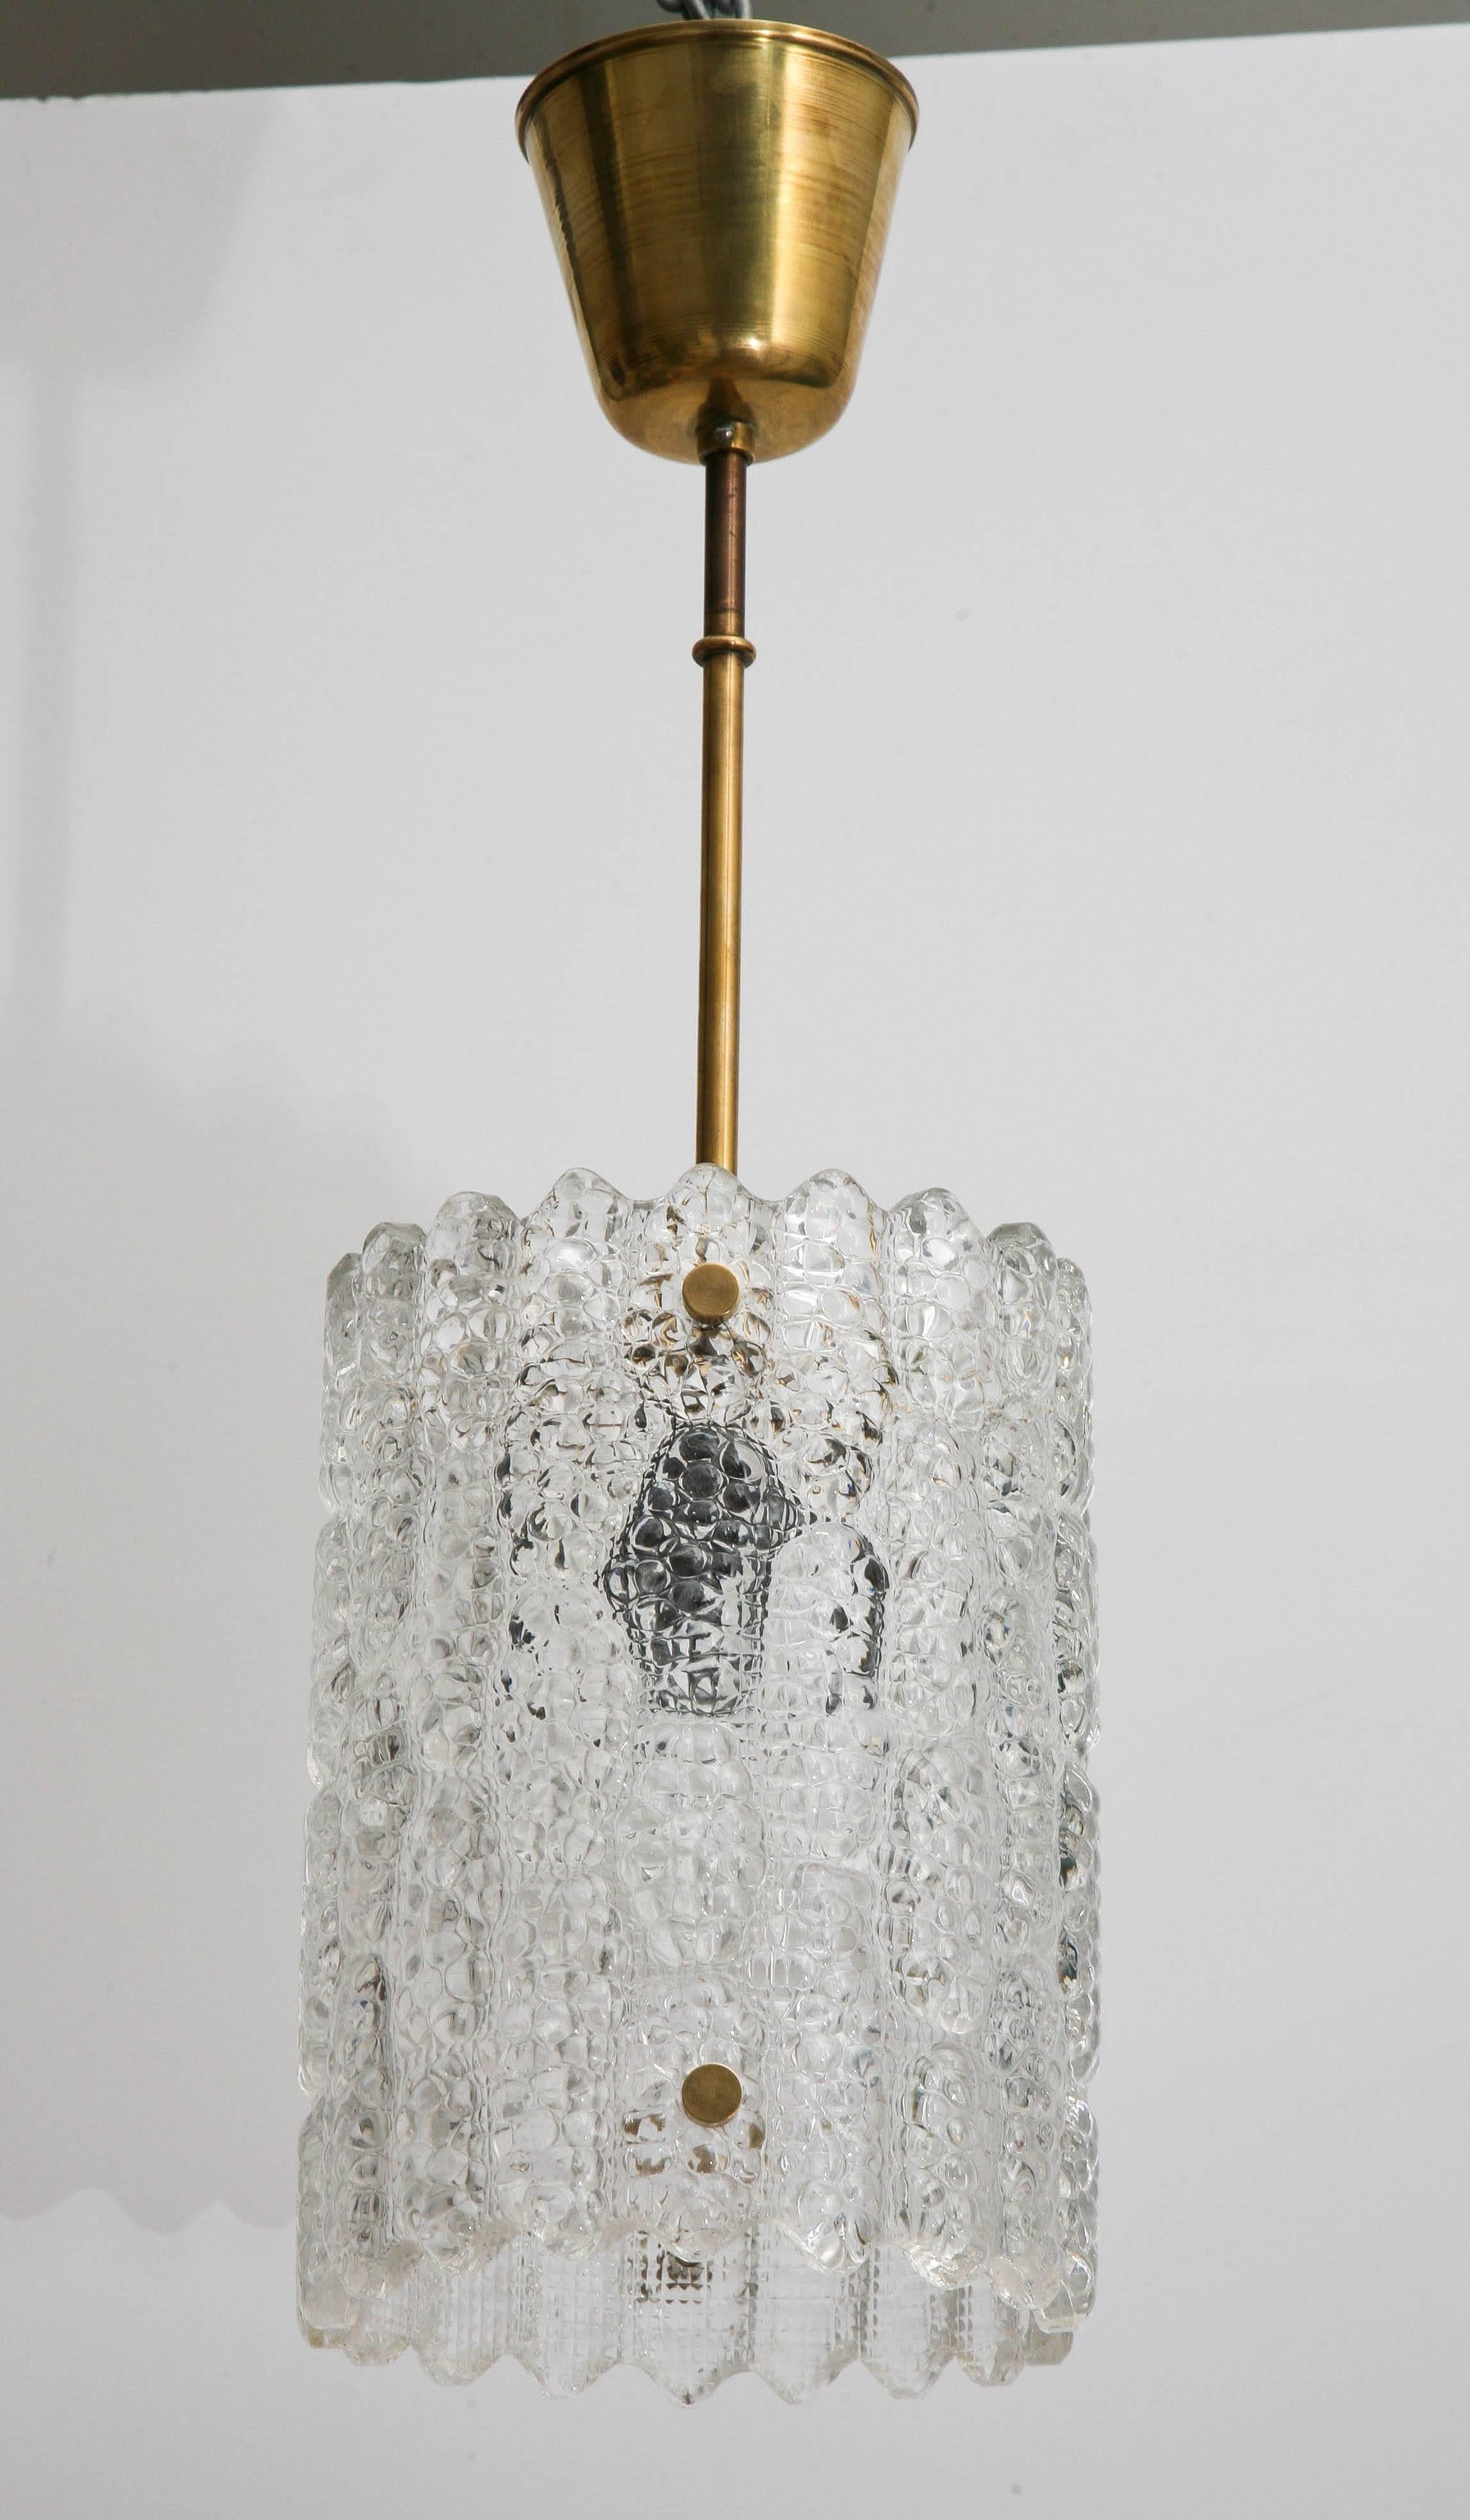 Orrefors crystal pendant light by Carl Fagerlund, Swedish, 1960s.
Classic textured Orrefors crystal design, brass canopy, stem and caps.
One Edison base light bulb  60 watt max, has been wired to US standard.
Measures: 21.00 in H x 7.00 in round.